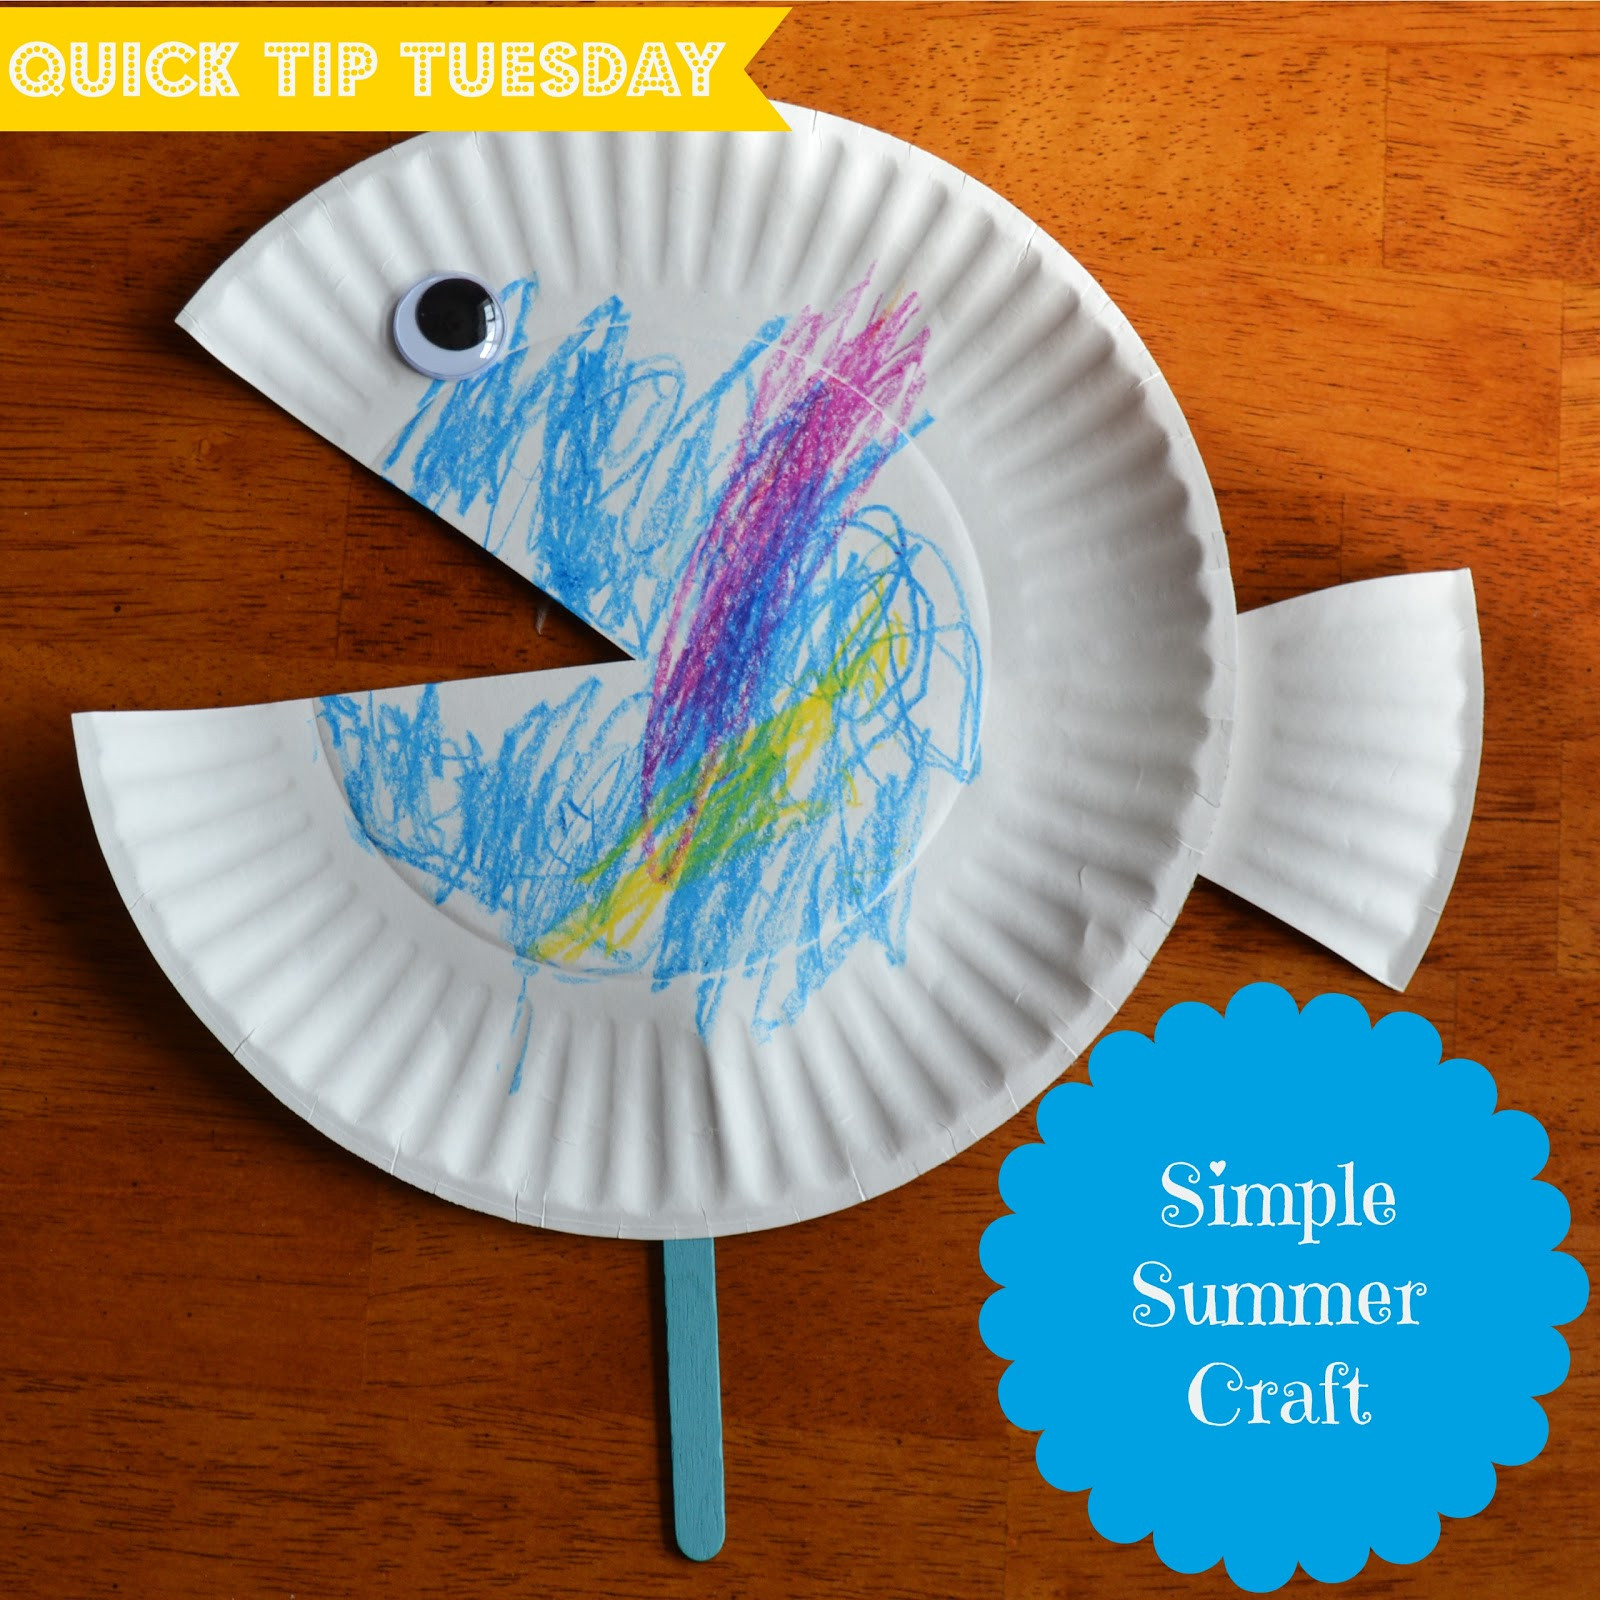 Simple Crafts For Preschoolers
 East Coast Mommy Quick Tip Tuesday 5 Simple Summer Craft